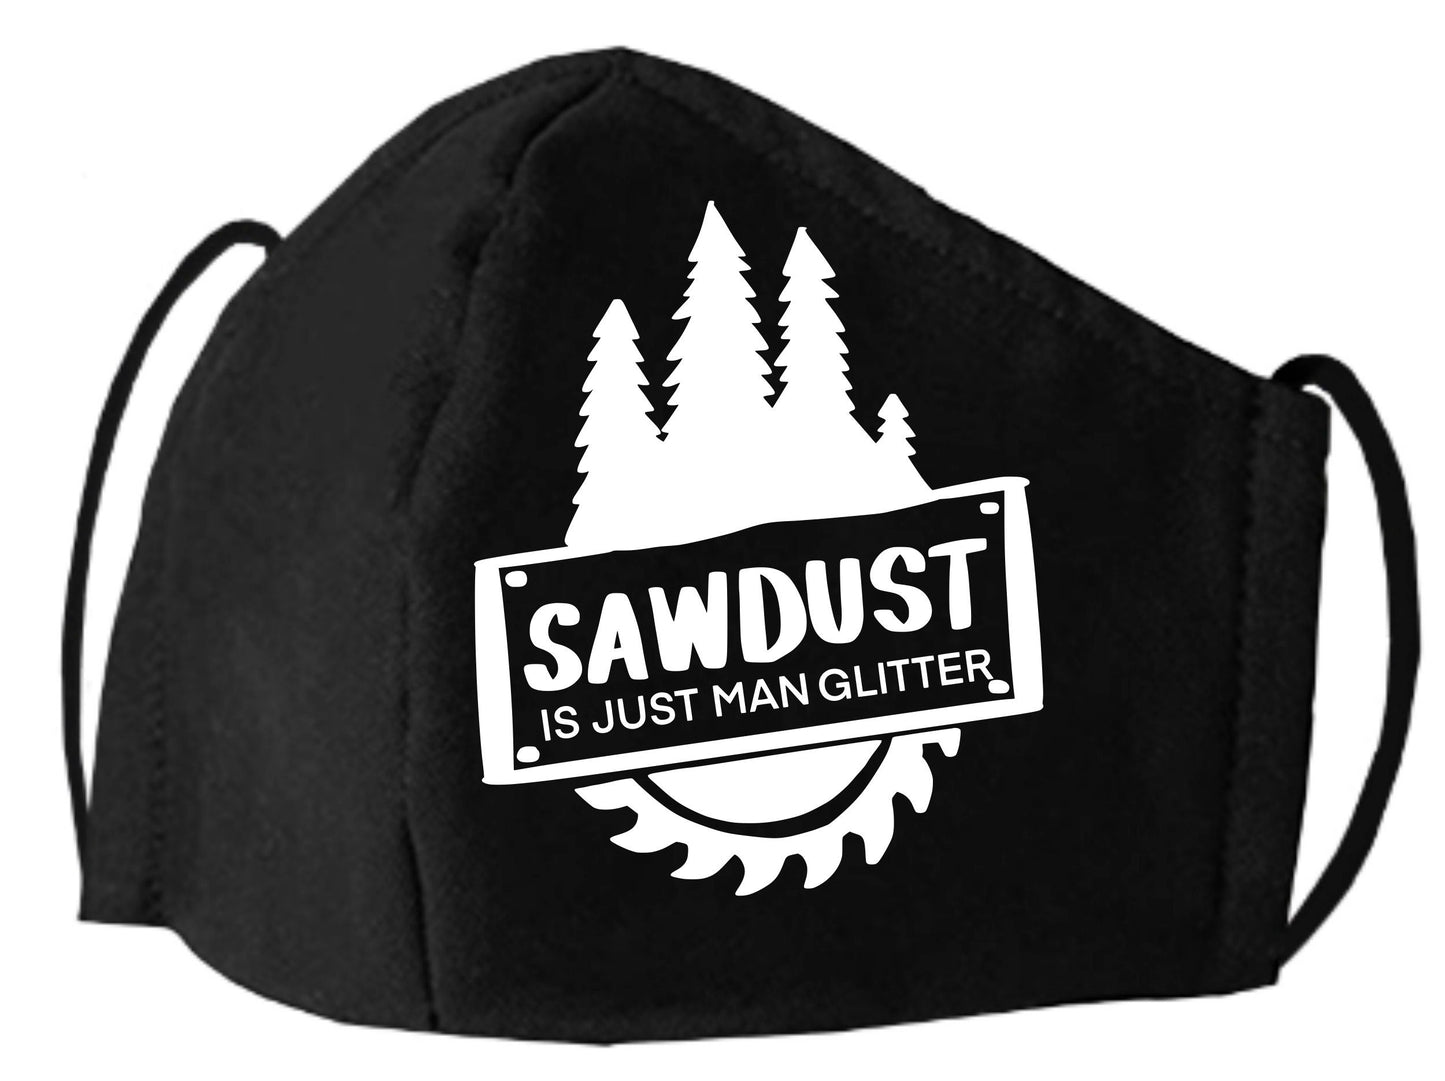 Sawdust Is Just Man Glitter, Dad Mask, Father's Day Mask, Father's Day, Father's Day Gift, Dad Gift, Dad Present, Dad 3, Best Dad Mask